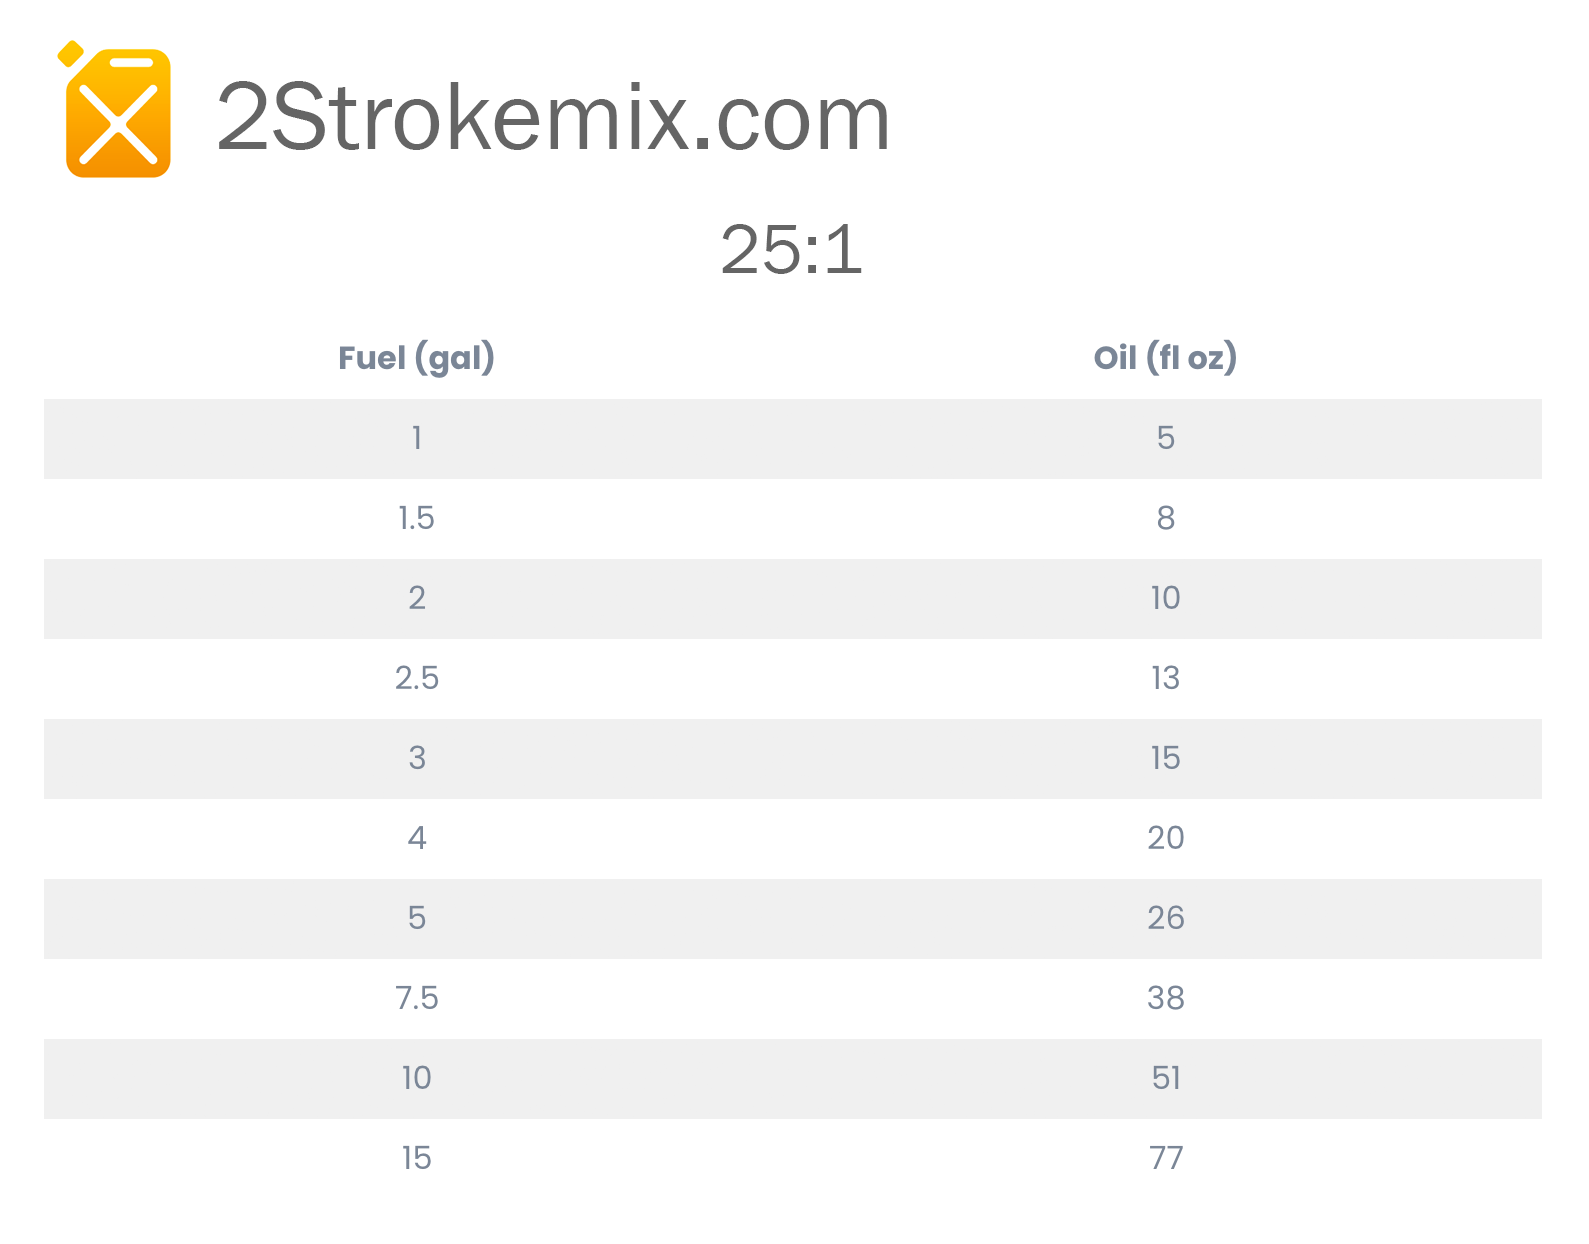 25-to-1-fuel-mix-chart-2-stroke-mix